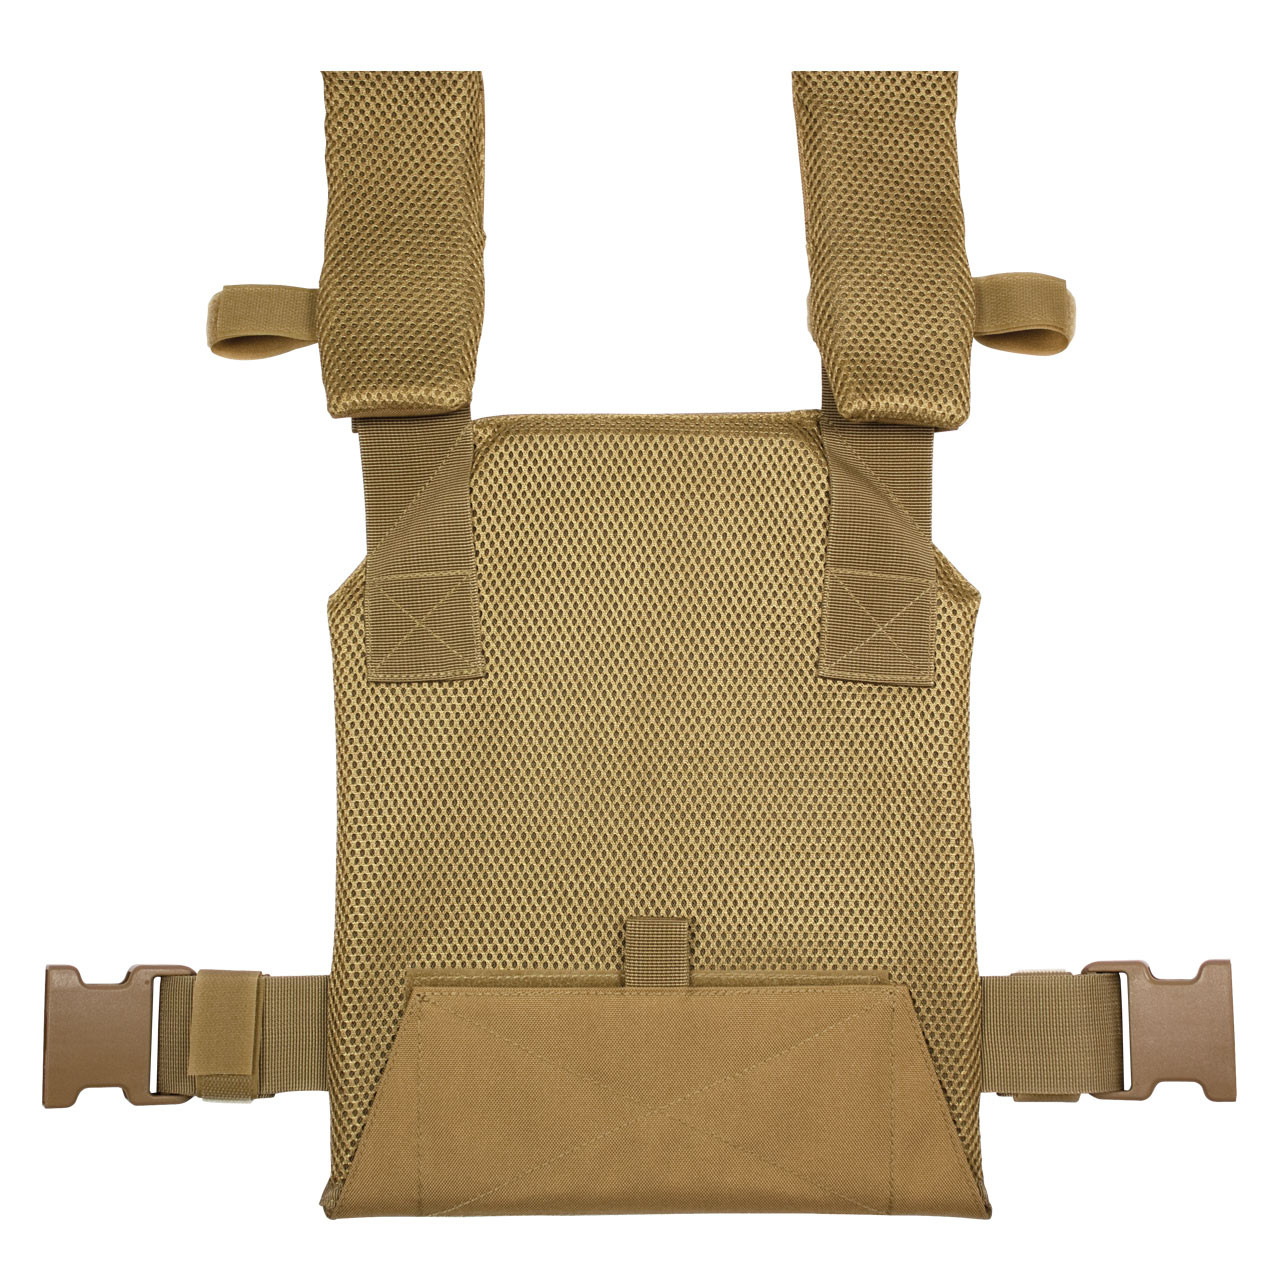 MOLLE Plate Carrier Inside - Coyote